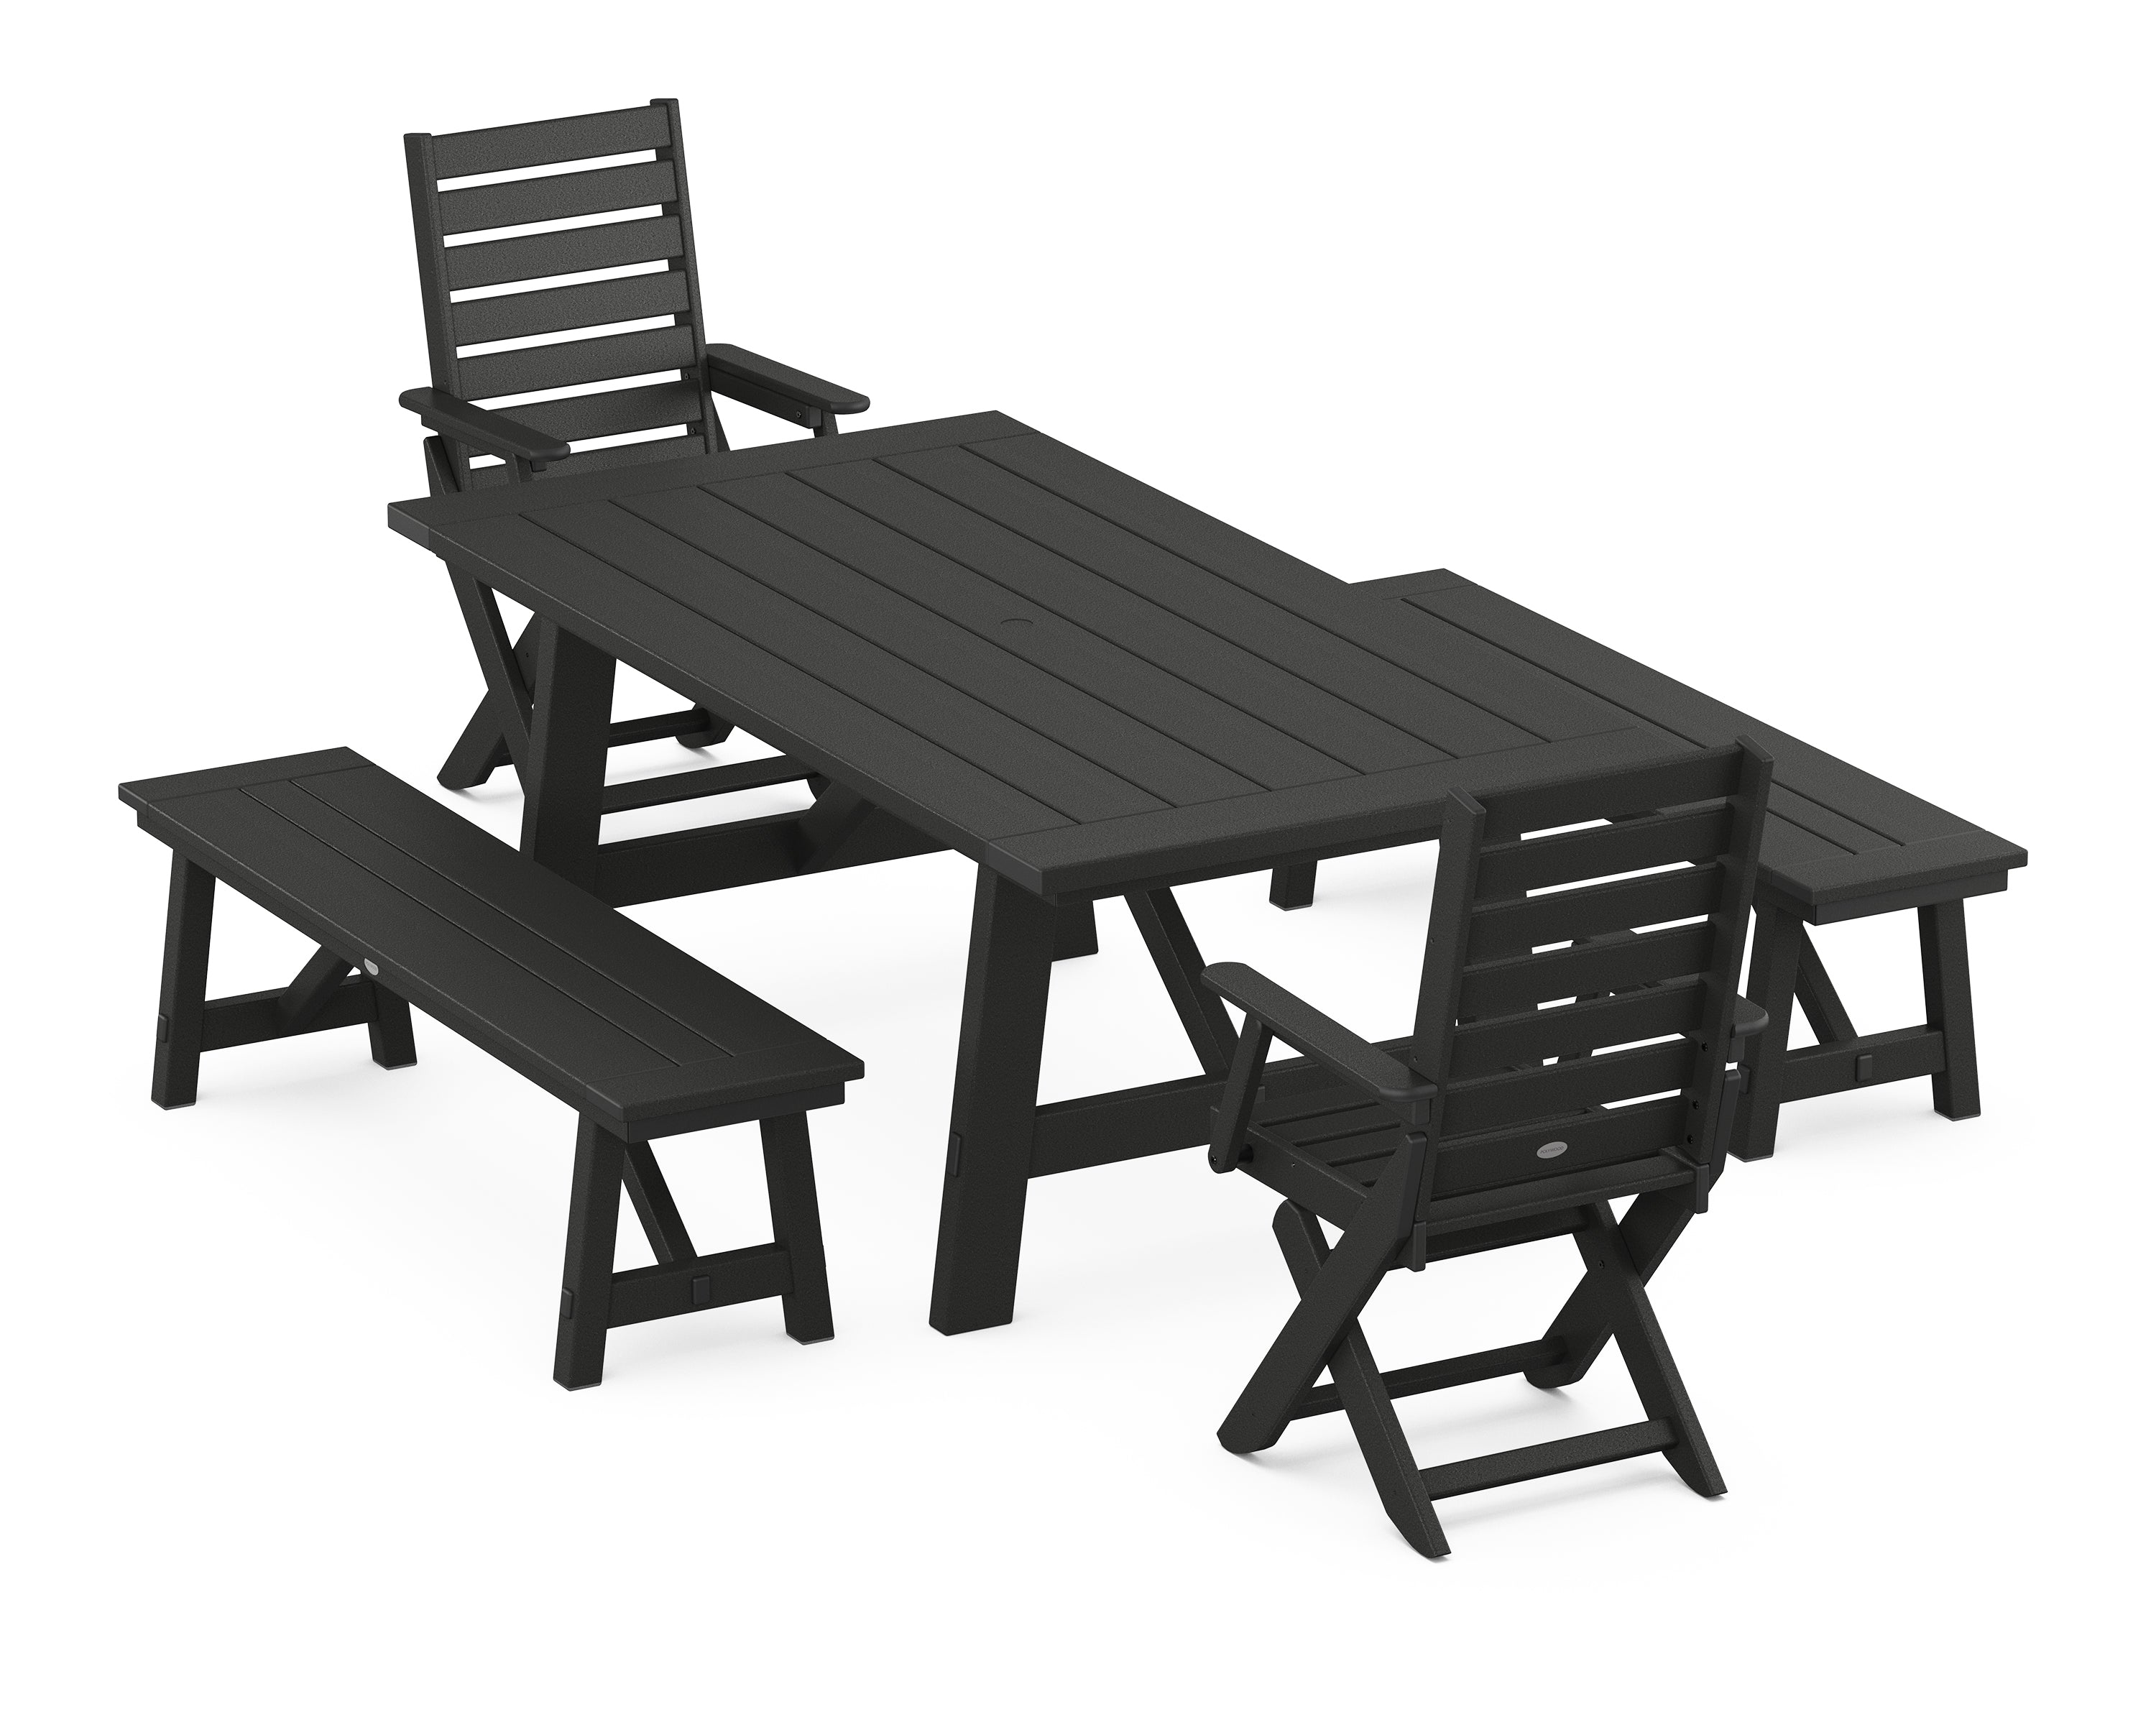 POLYWOOD® Captain Folding Chair 5-Piece Rustic Farmhouse Dining Set With Benches in Black